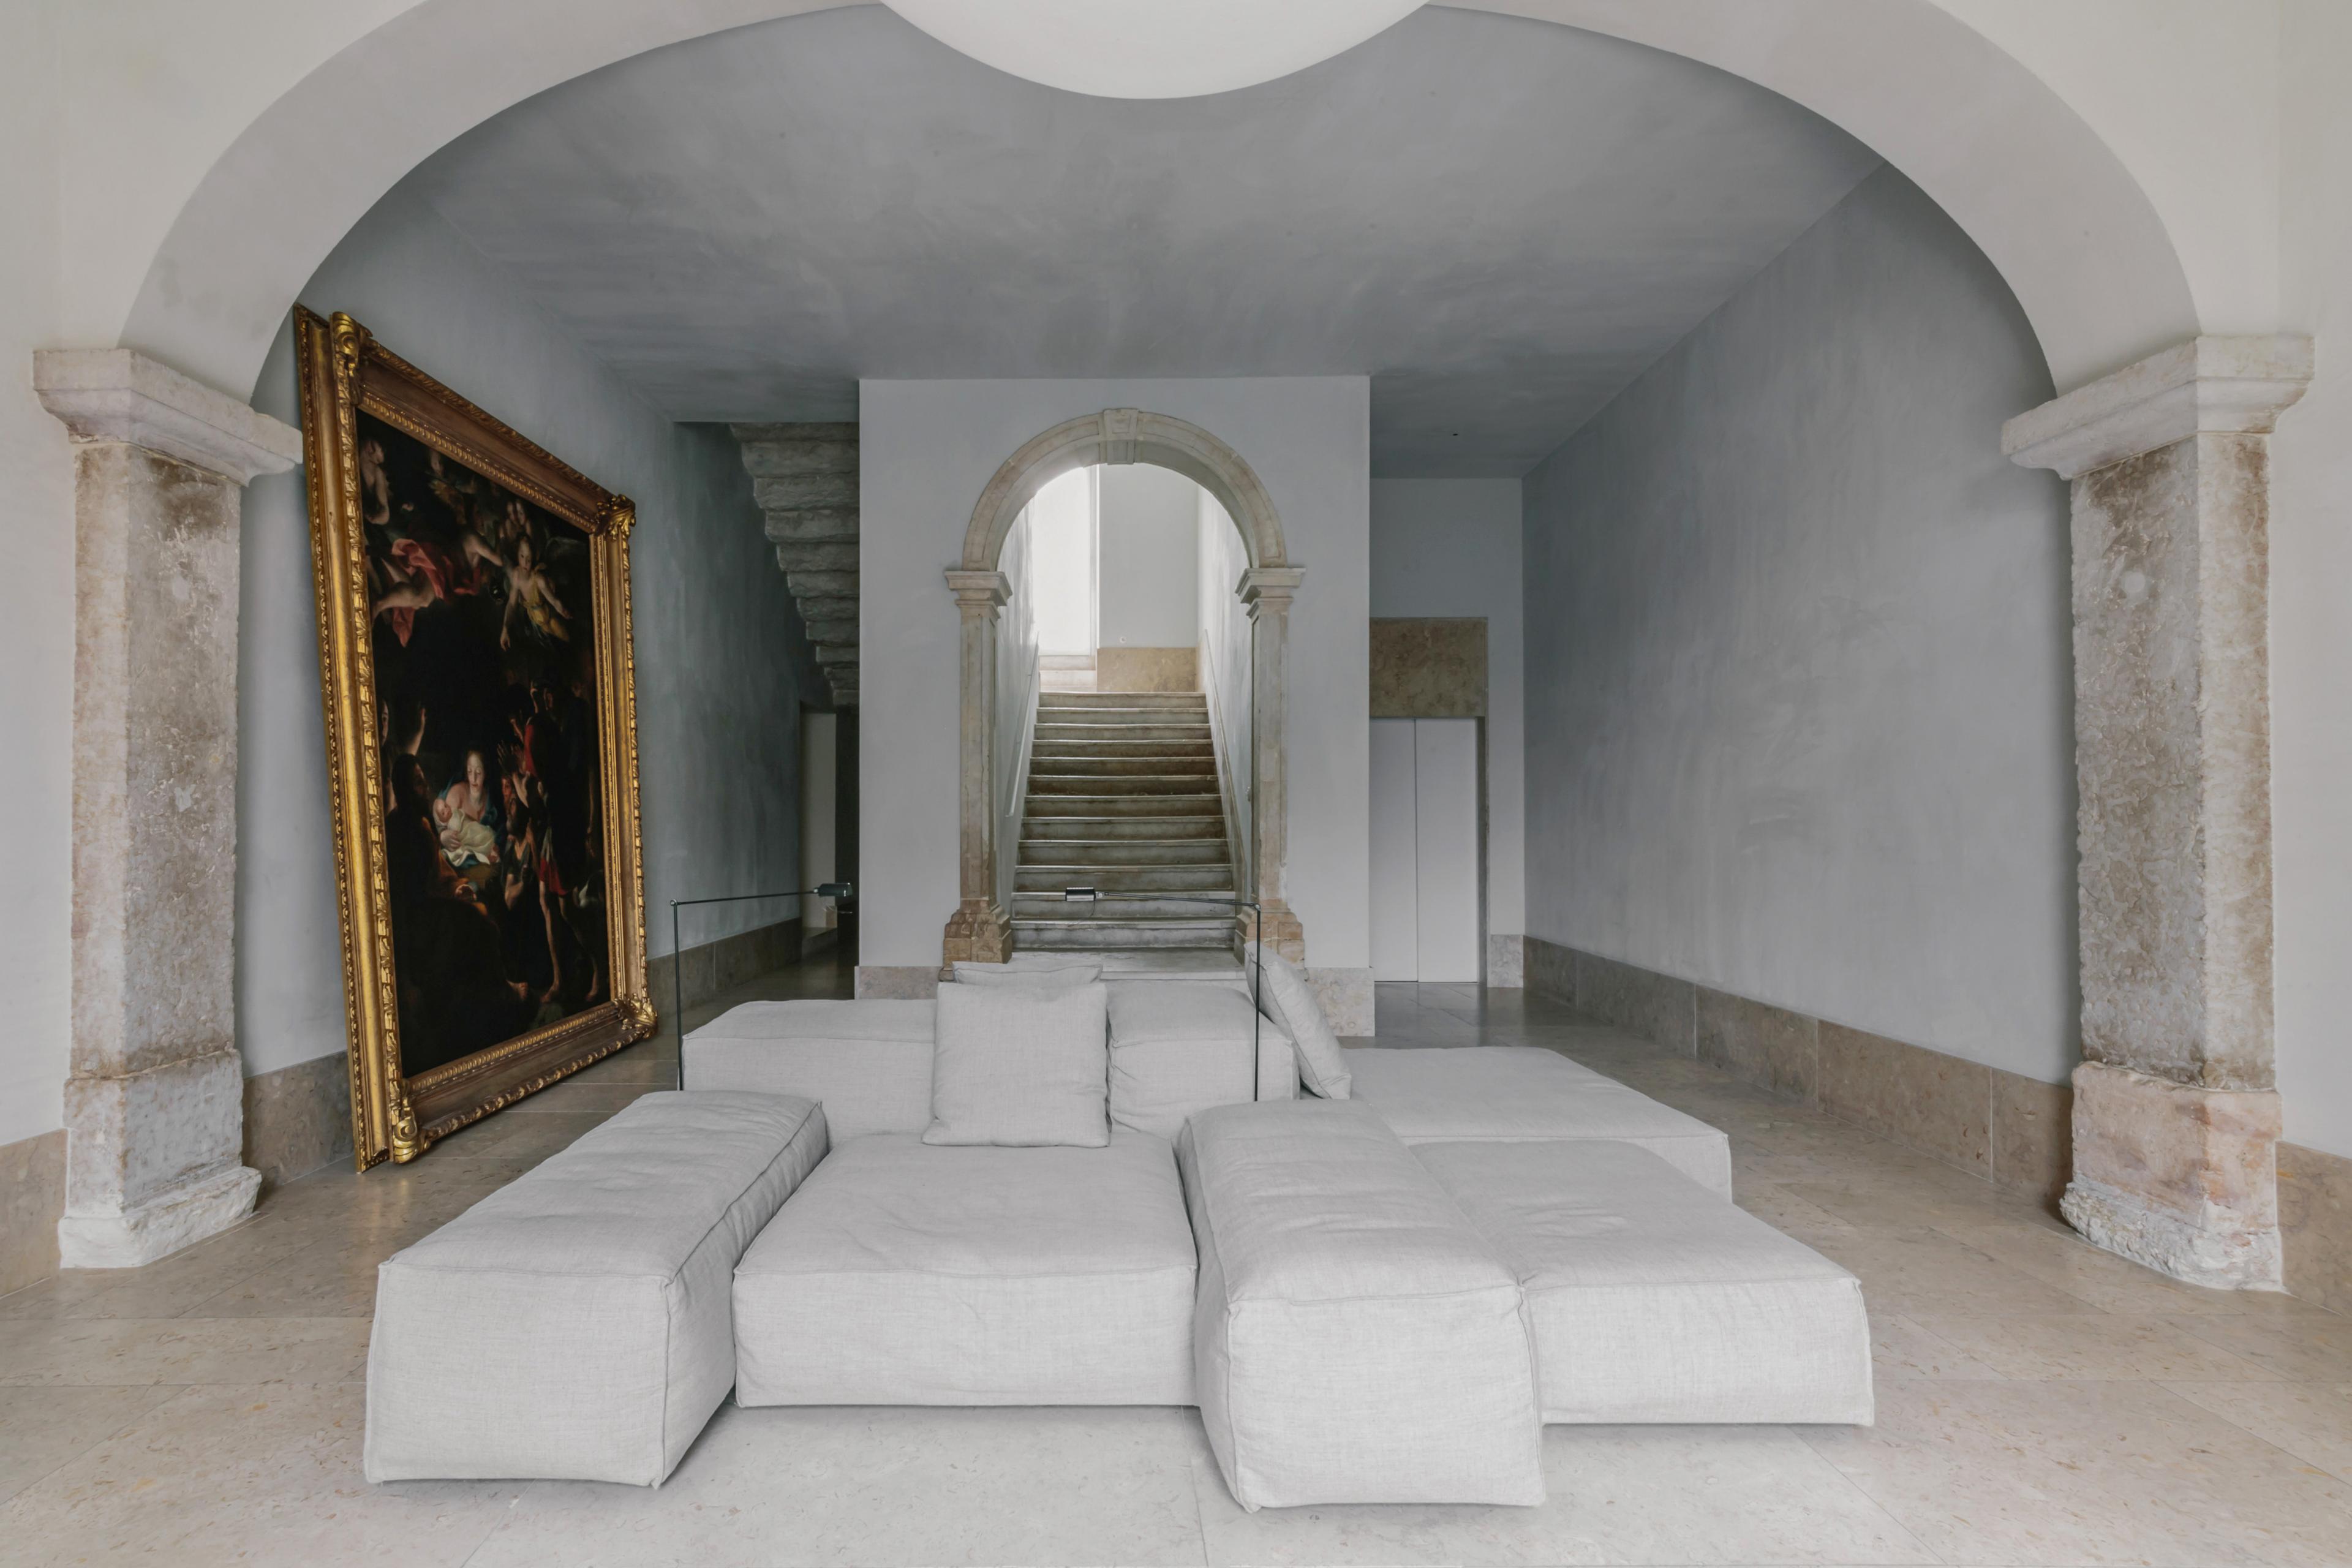 whitewashed walls and a vaulted ceiling in an old historic home in europe, with a cluster of white poofy-square-seats arranged in the center and a grand oil painting taking up the full wall on the left. a staircase is in the background